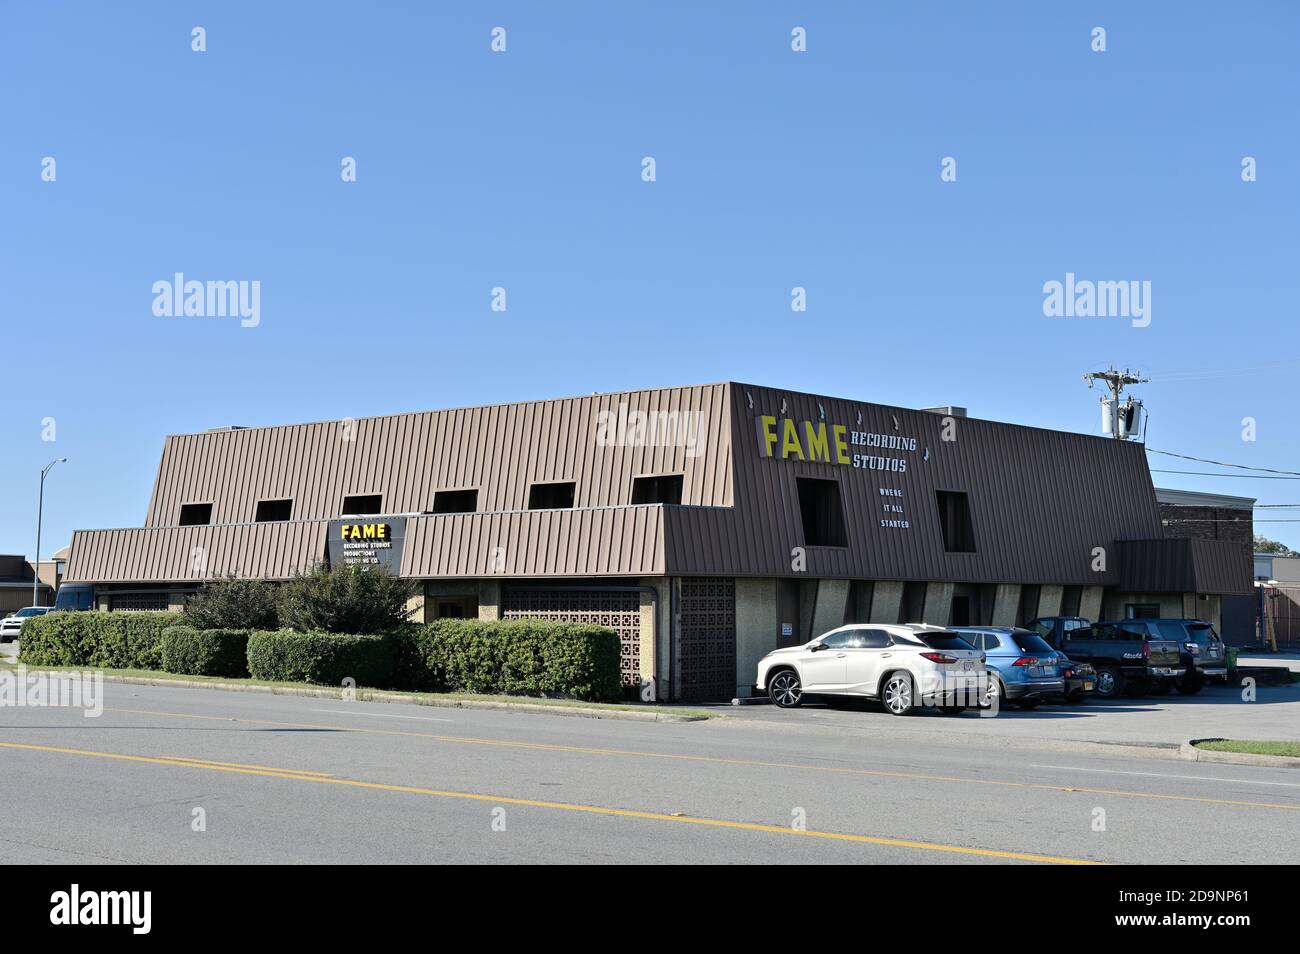 Fame recording studios exterior front a famous music recording studio in Muscle Shoals Alabama, USA. Stock Photo